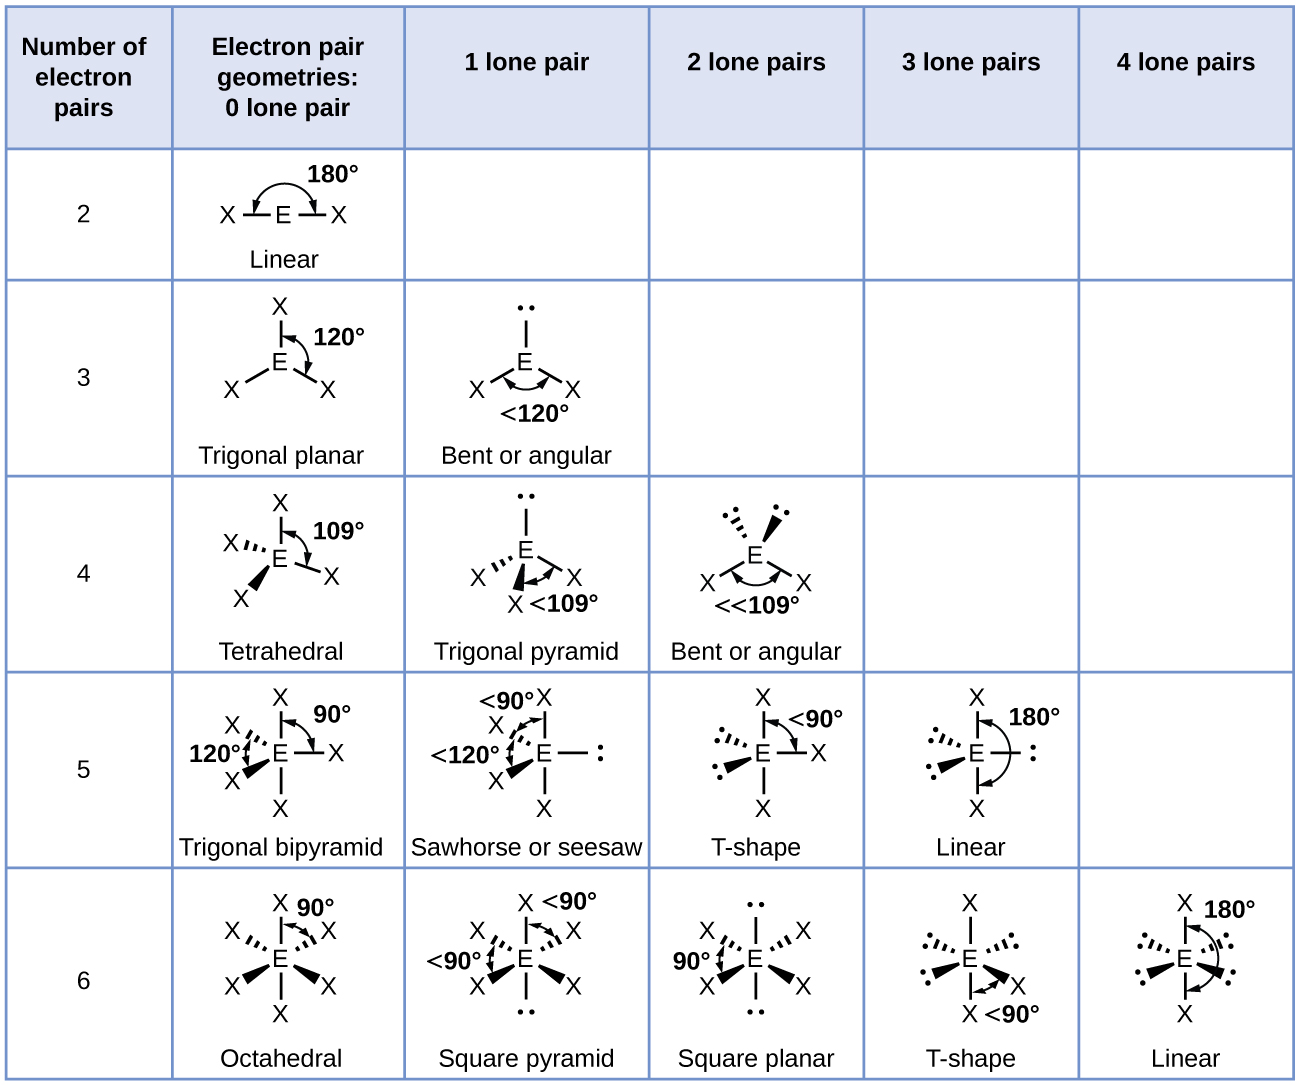 electron pair geometry and structure chart